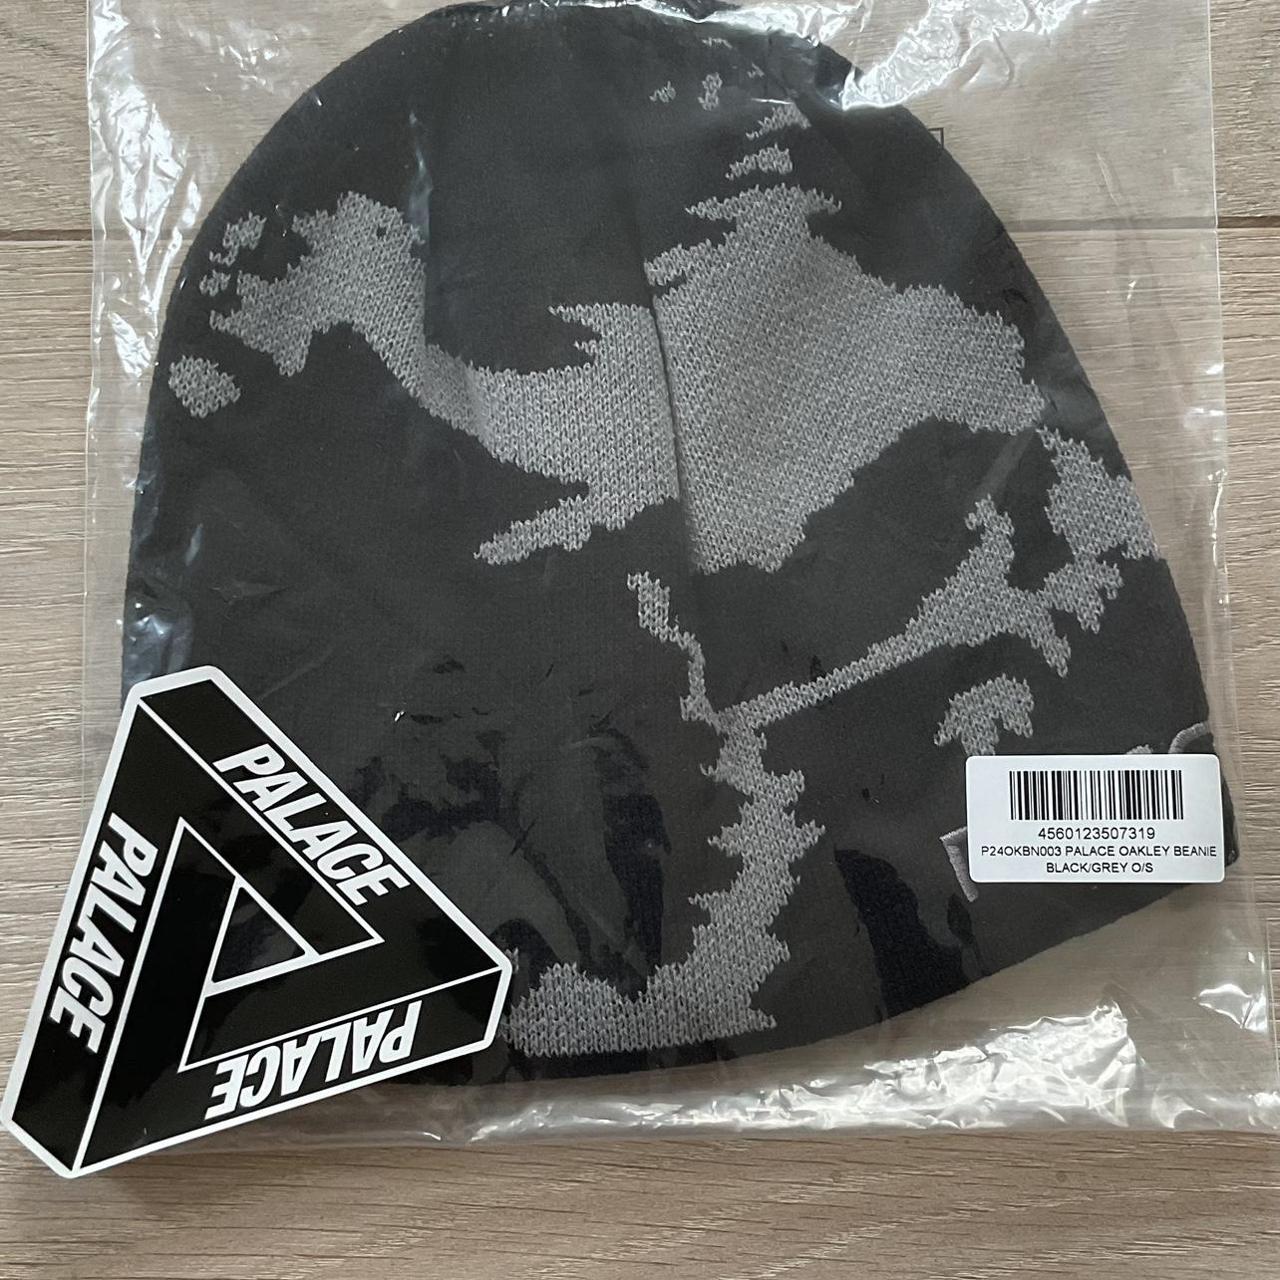 Palace x Oakley beanie in black and grey. Brand new,...